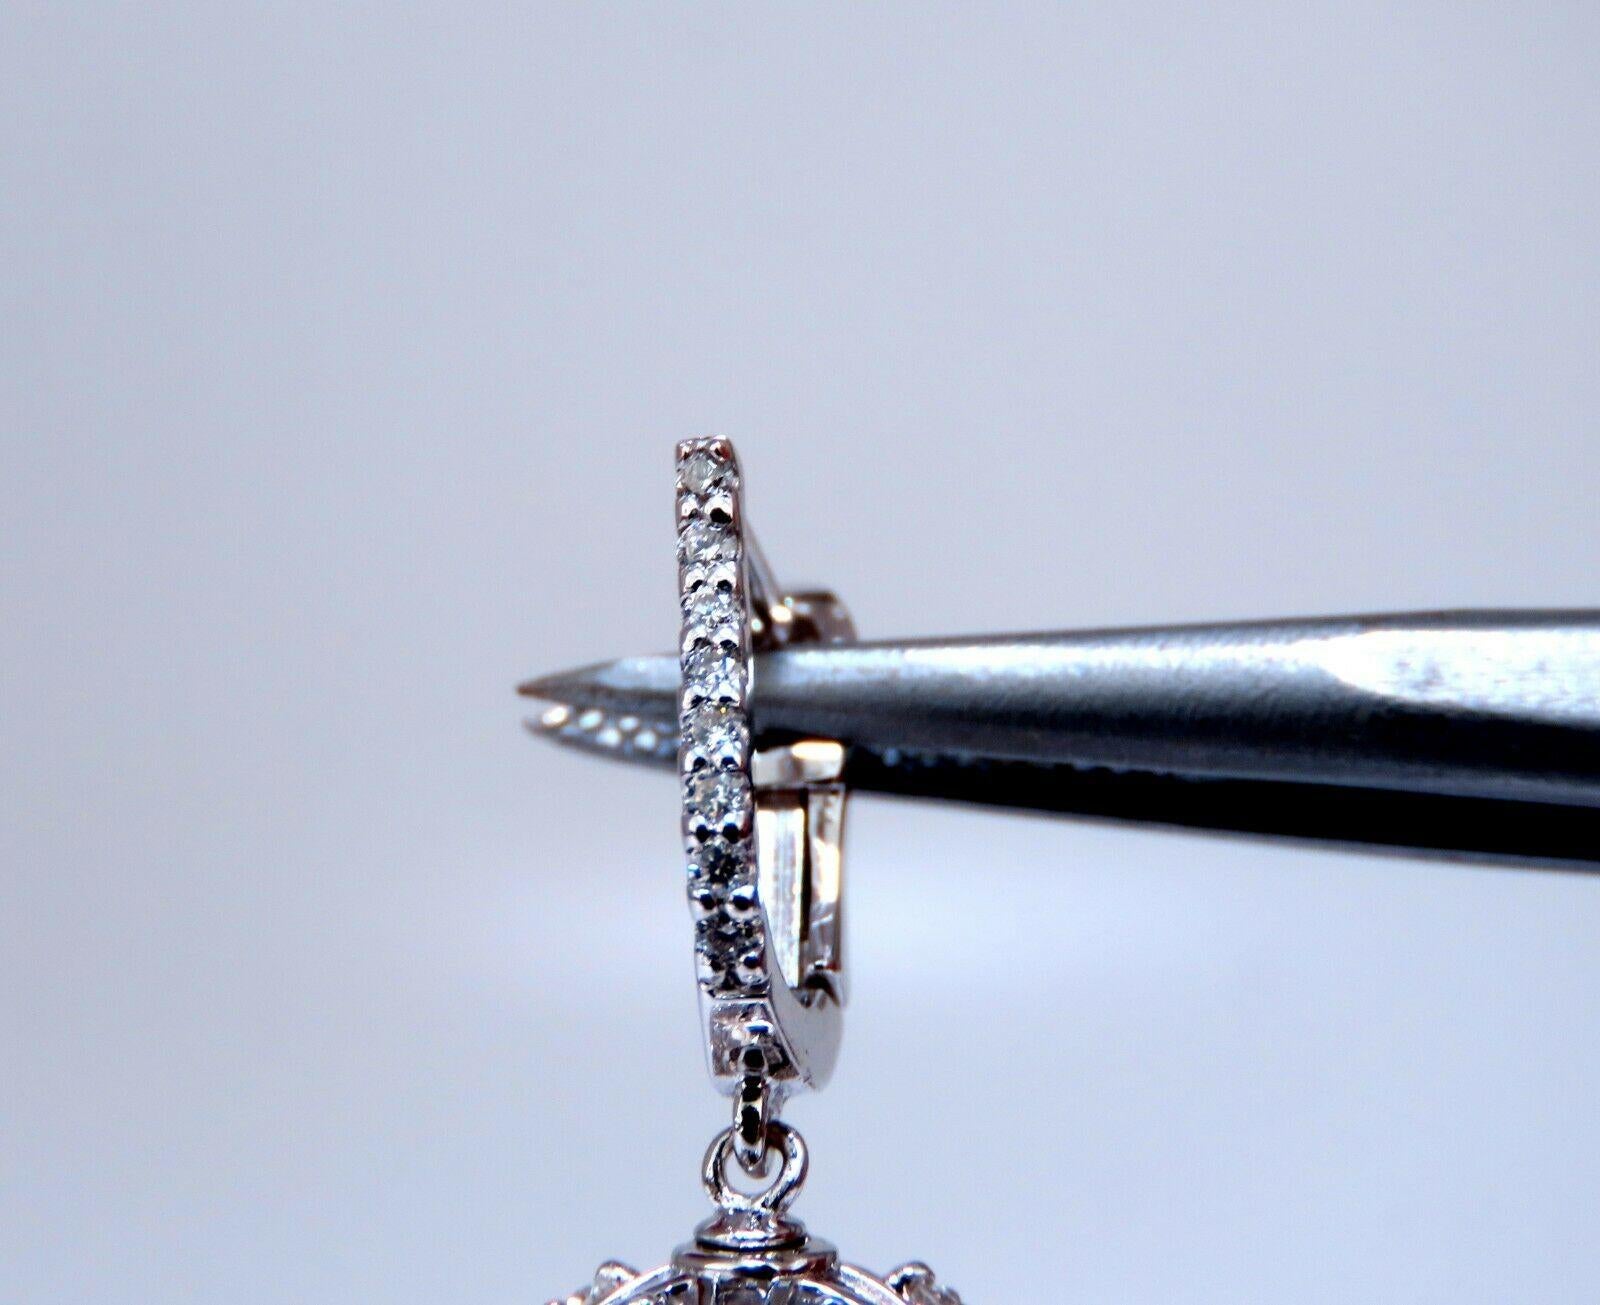 Umbrella cascading dangle diamonds earrings

1.50 carat natural round diamonds

G color vs2 clarity

14kt white gold 9 grams

Earring measure 2 inch long

11mm diameter canopy

Comfortable lever clip

$8,000 appraisal certificate to accompany